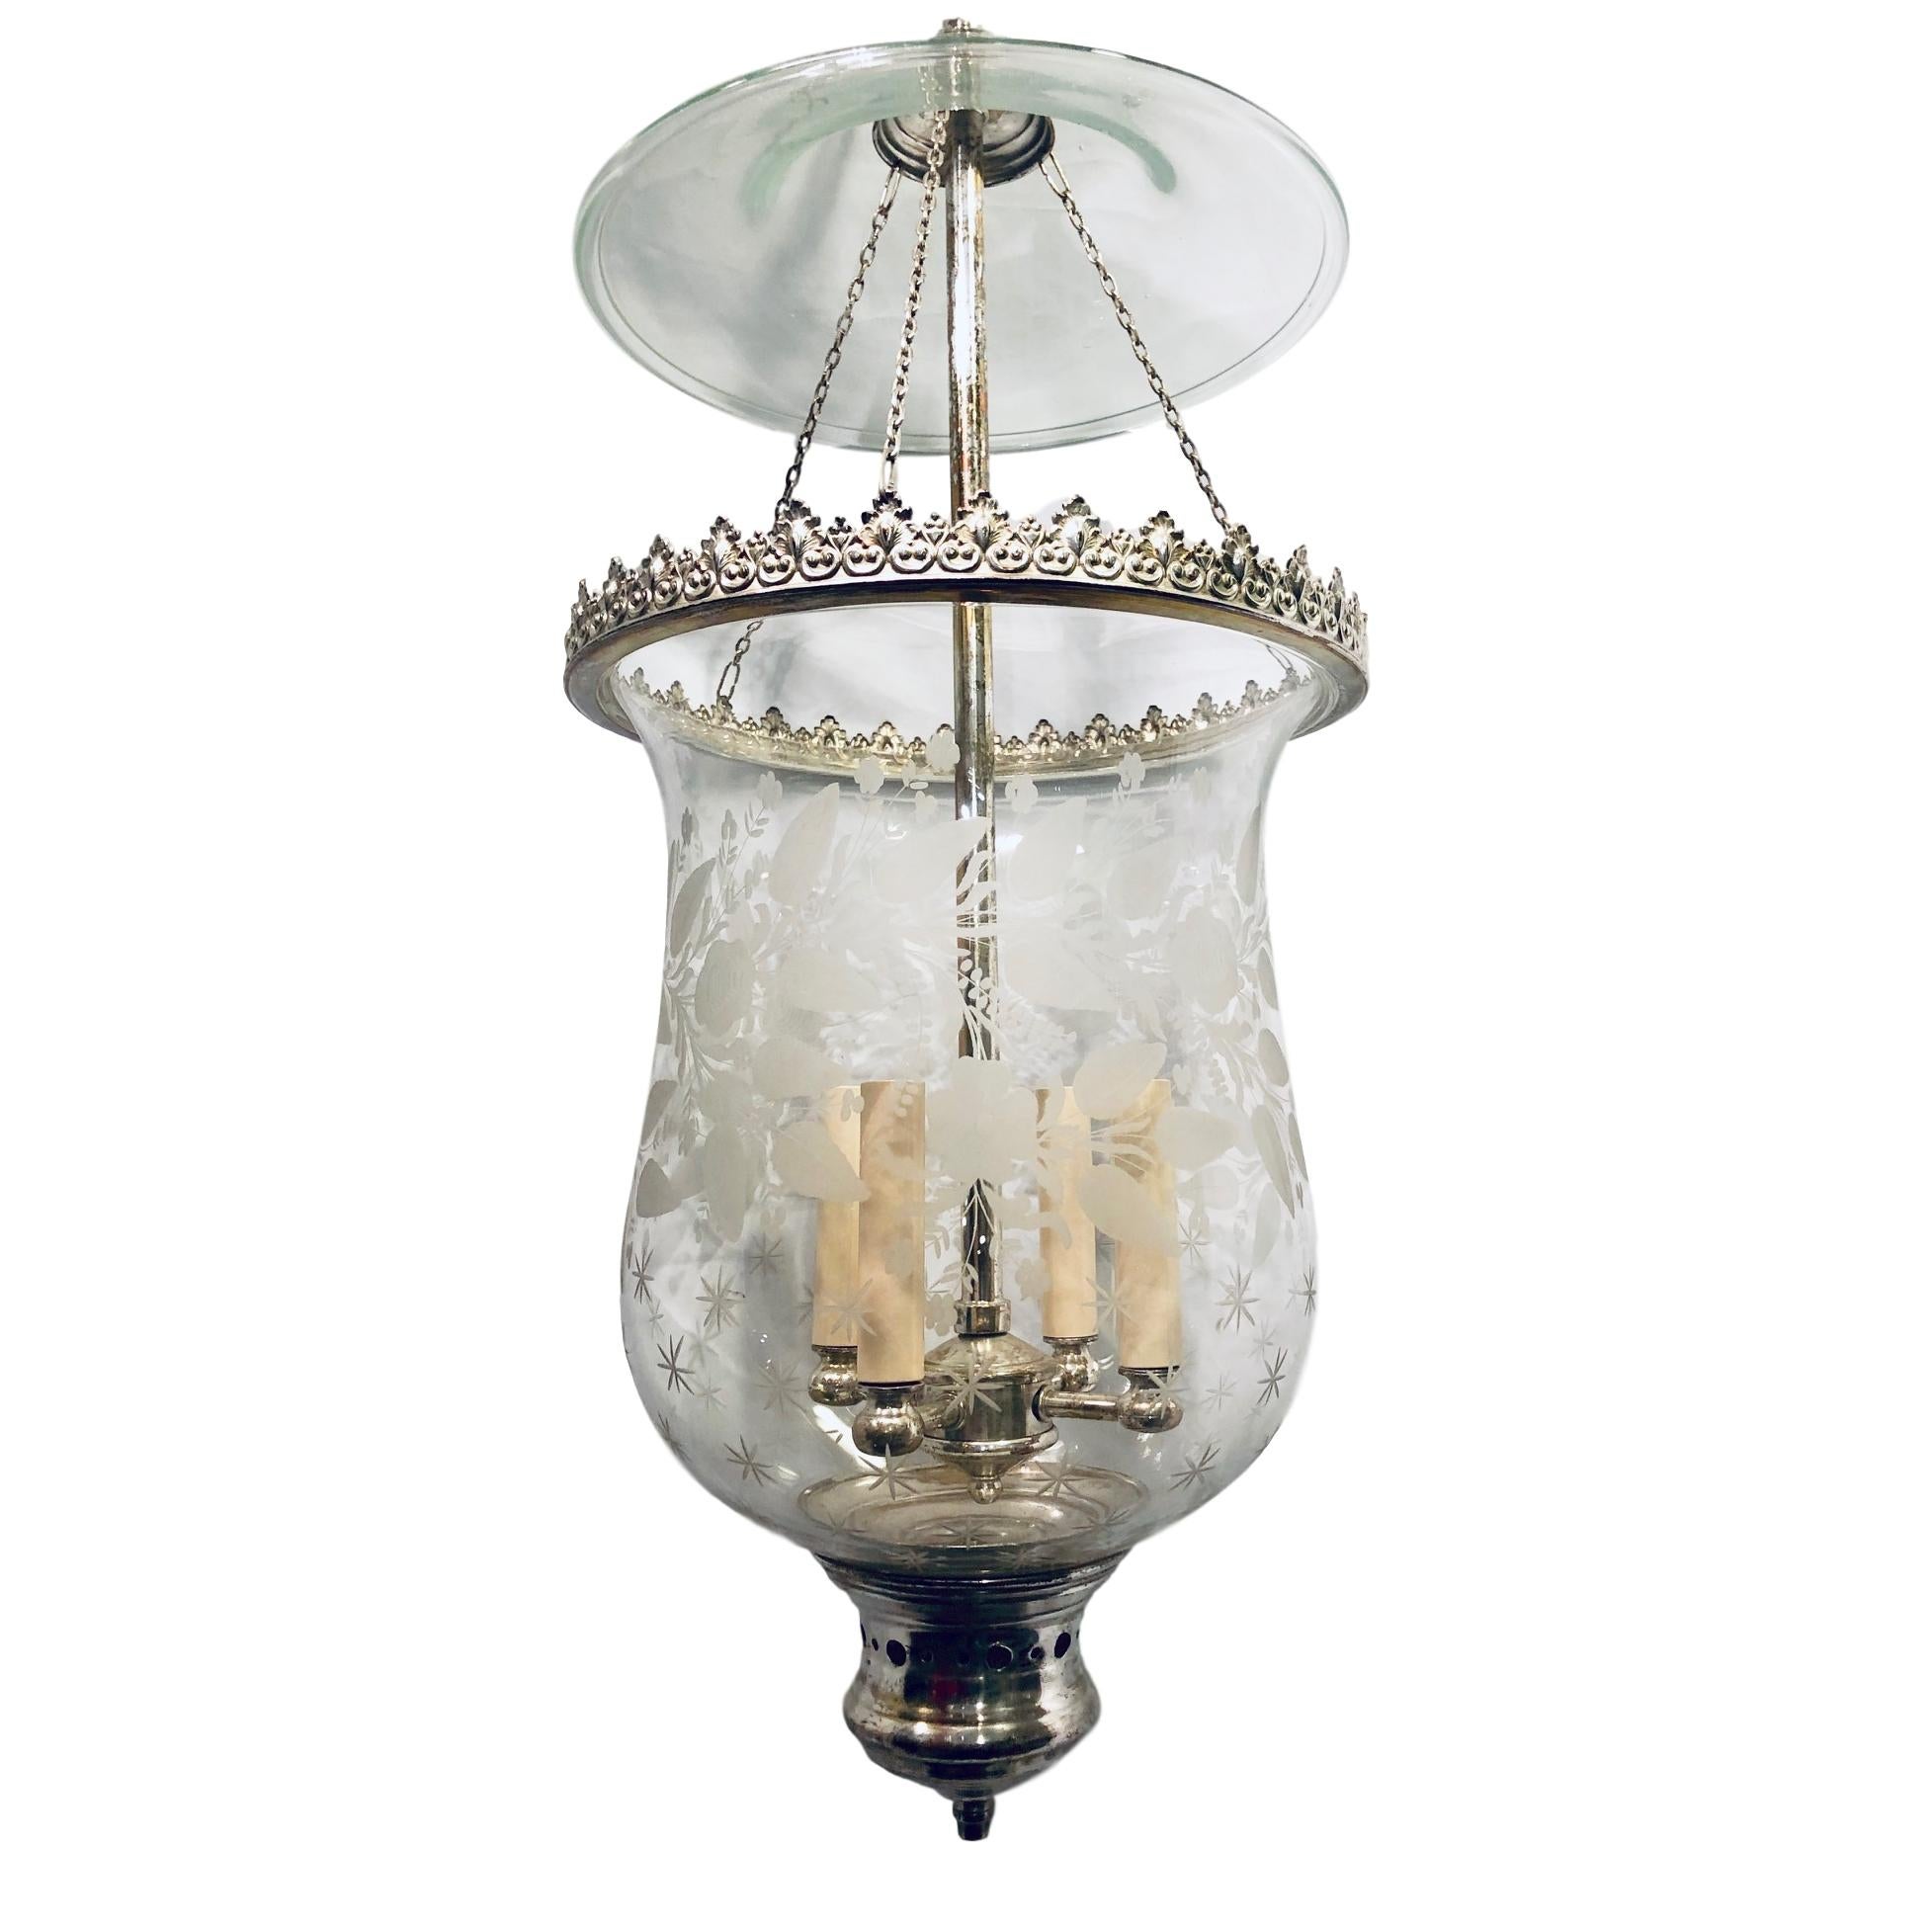 A circa 1910 Italian silver plated lantern with etched glass in floral motif and interior cluster of 4 candelabra lights.

Measurements:
Drop (current) 37